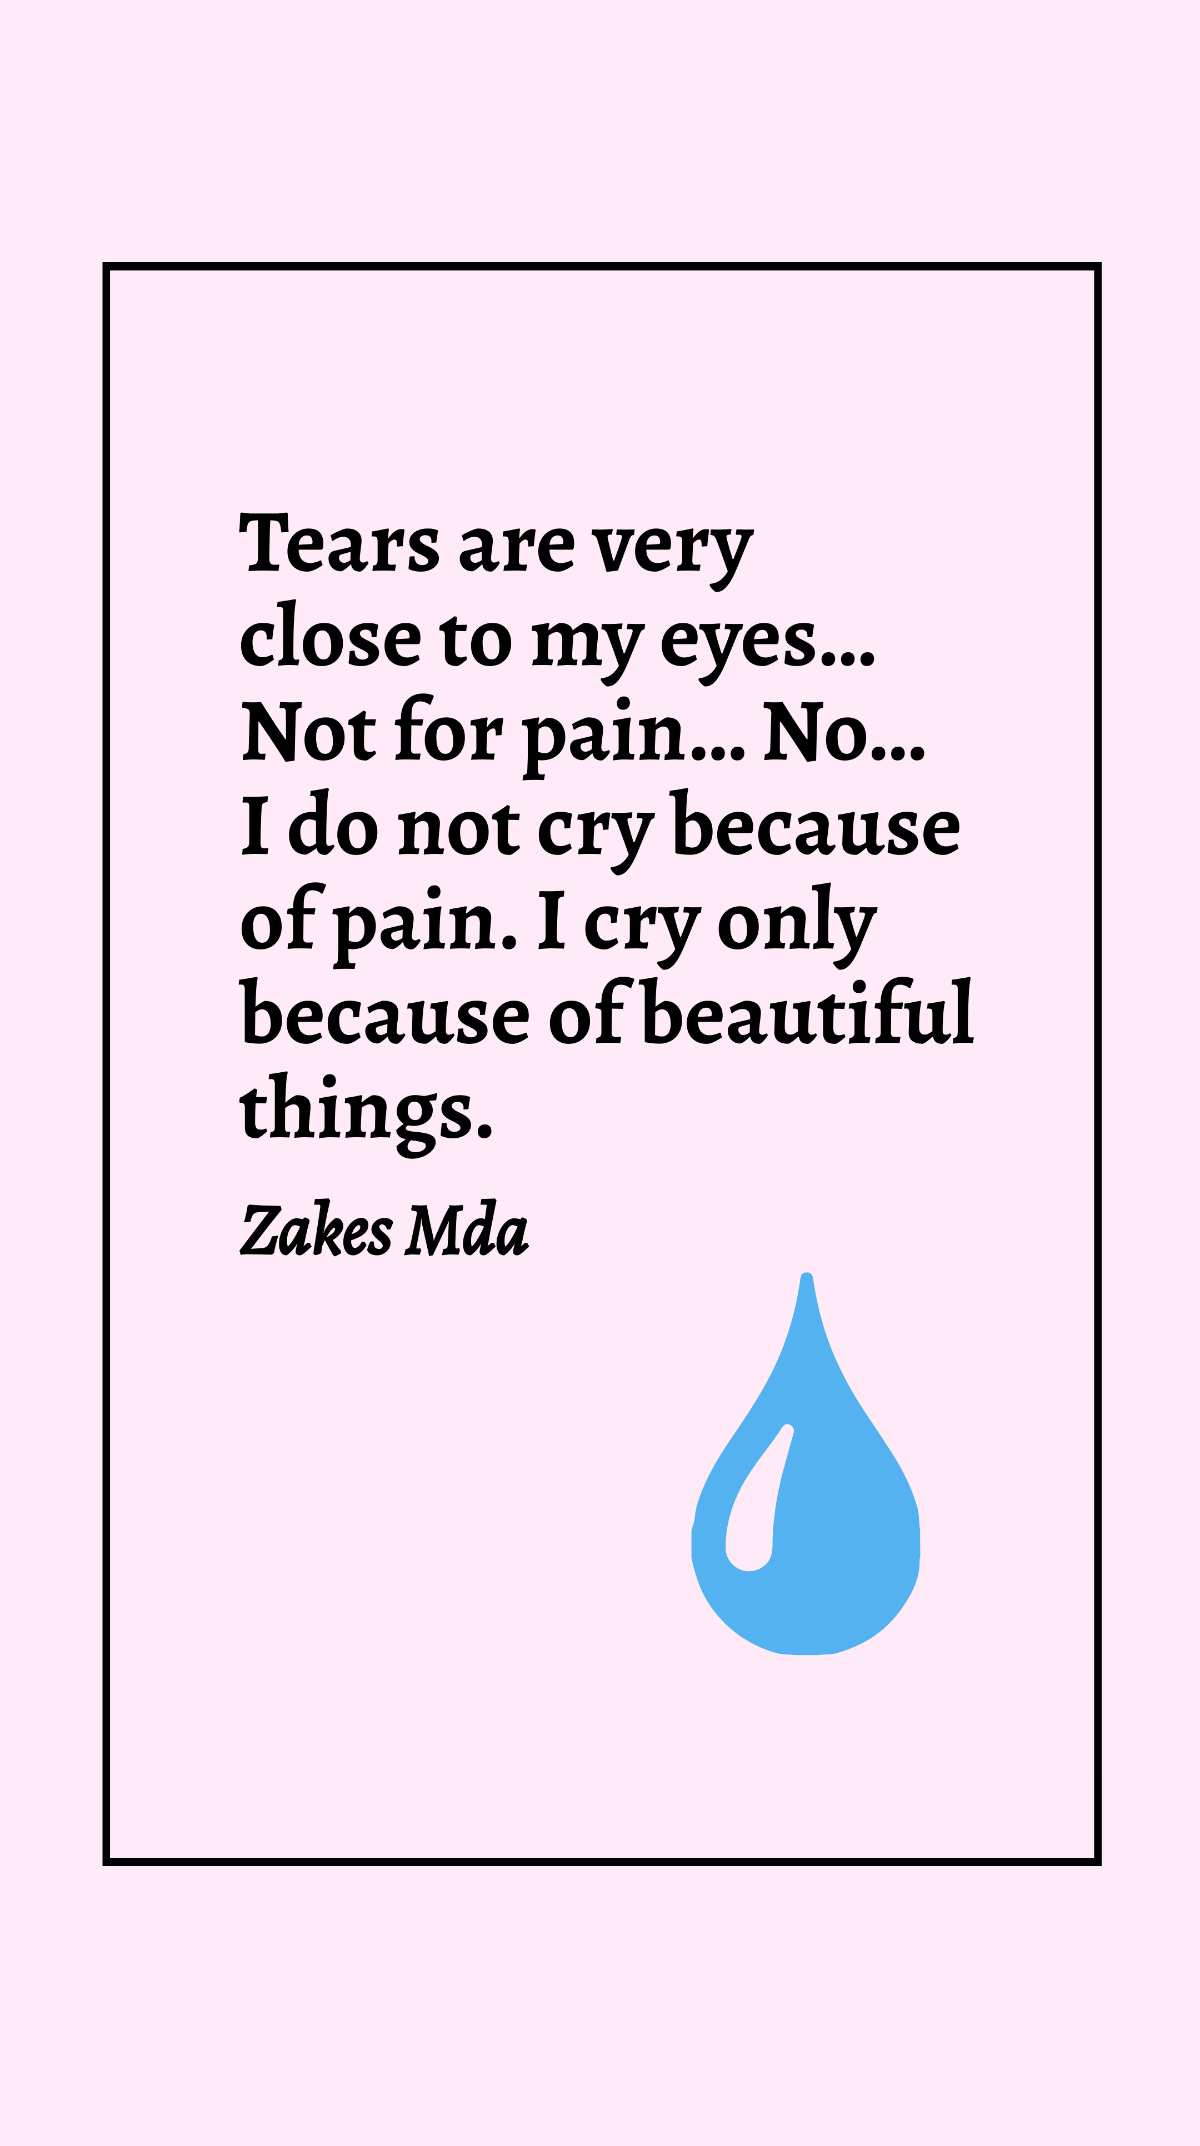 Free Zakes Mda - Tears are very close to my eyes… Not for pain… no… I do not cry because of pain. I cry only because of beautiful things. Template